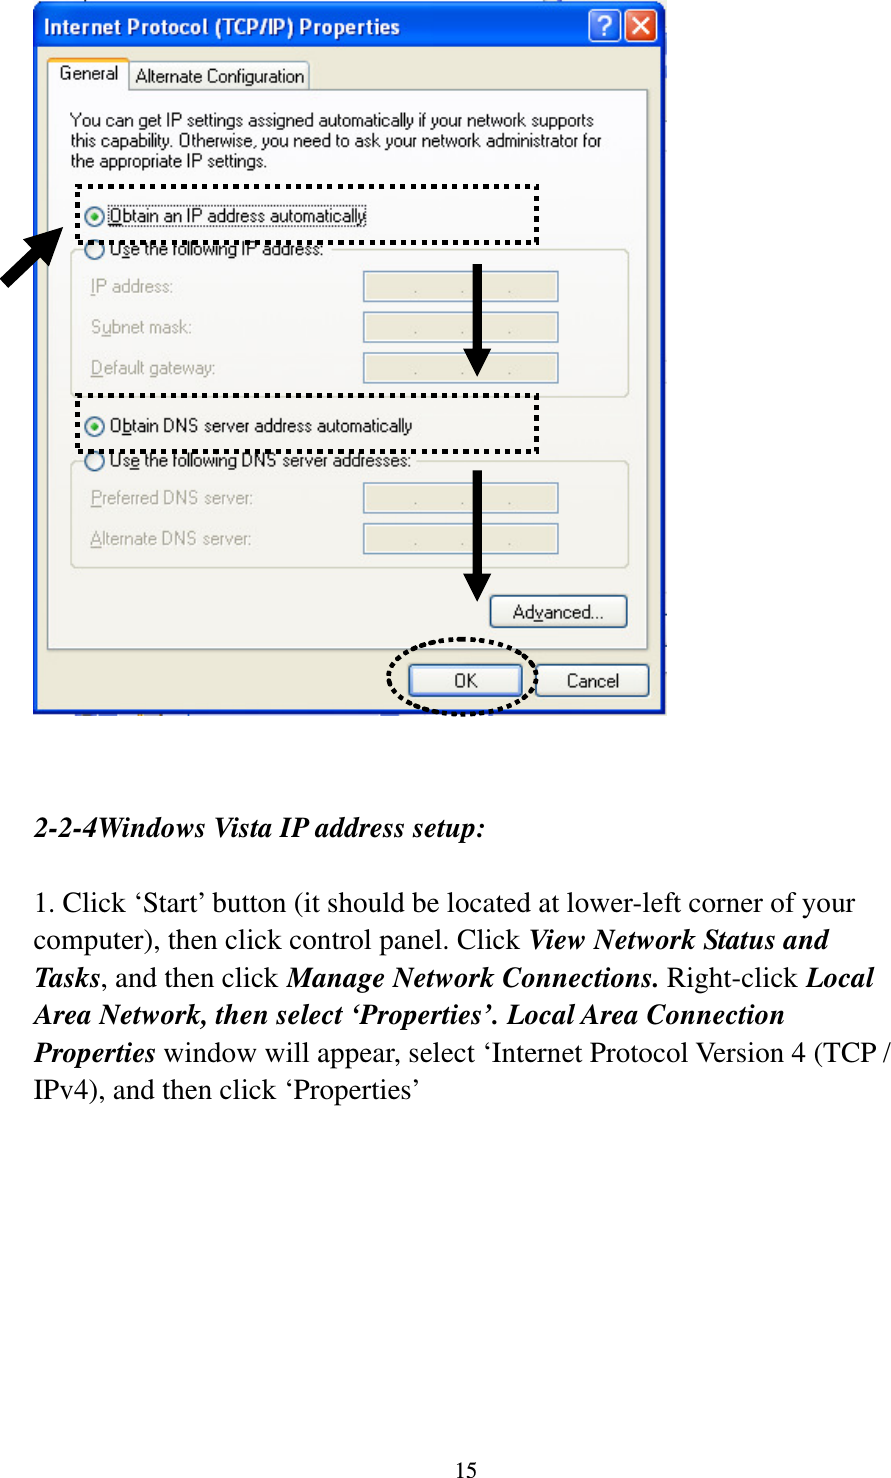 15    2-2-4Windows Vista IP address setup:  1. Click ‘Start’ button (it should be located at lower-left corner of your computer), then click control panel. Click View Network Status and Tasks, and then click Manage Network Connections. Right-click Local Area Network, then select ‘Properties’. Local Area Connection Properties window will appear, select ‘Internet Protocol Version 4 (TCP / IPv4), and then click ‘Properties’  